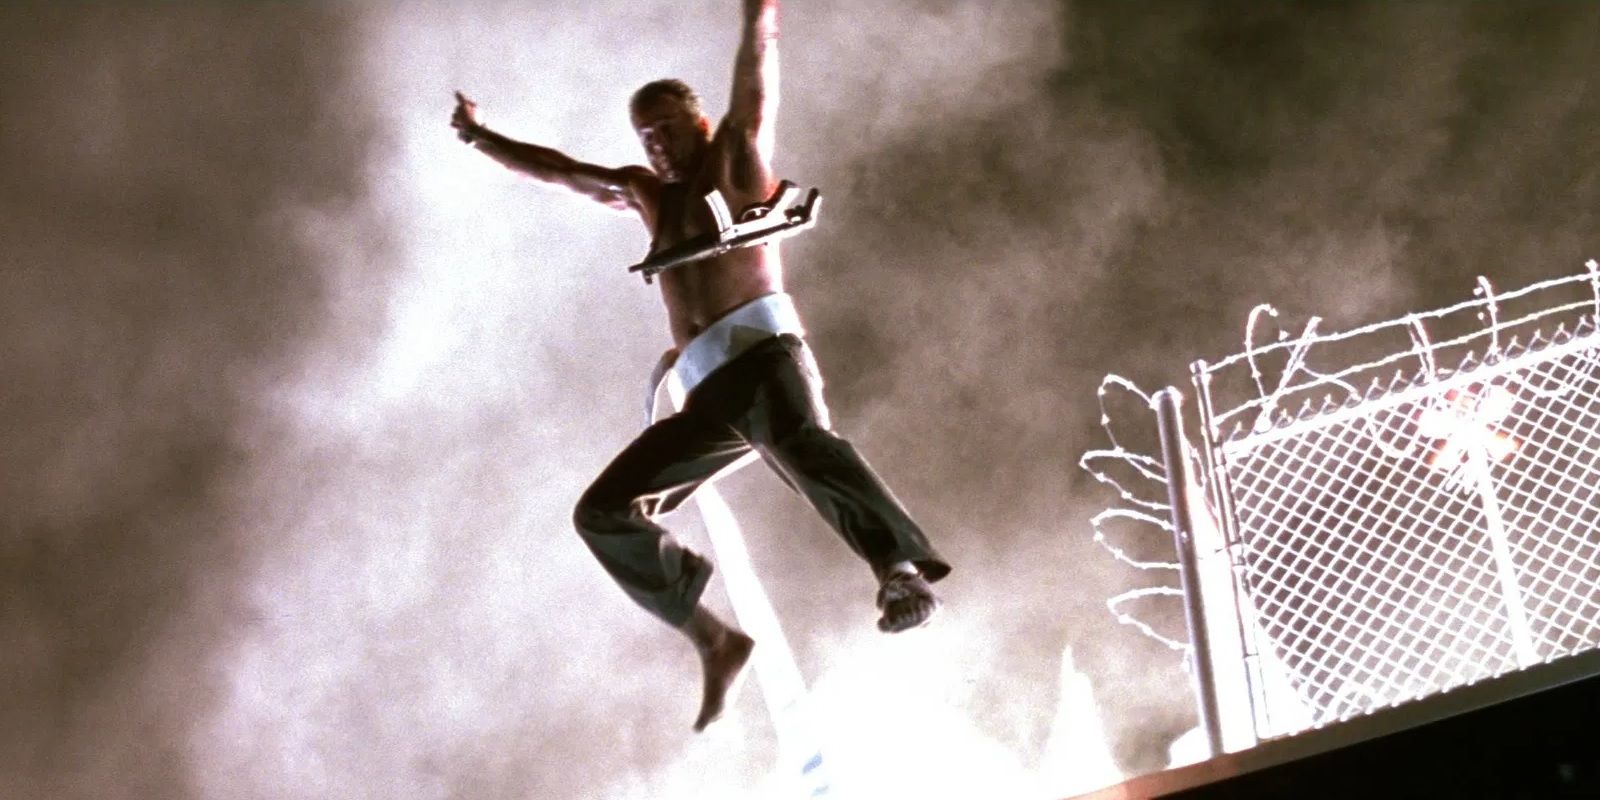 John McClane jumps off the roof in Die Hard